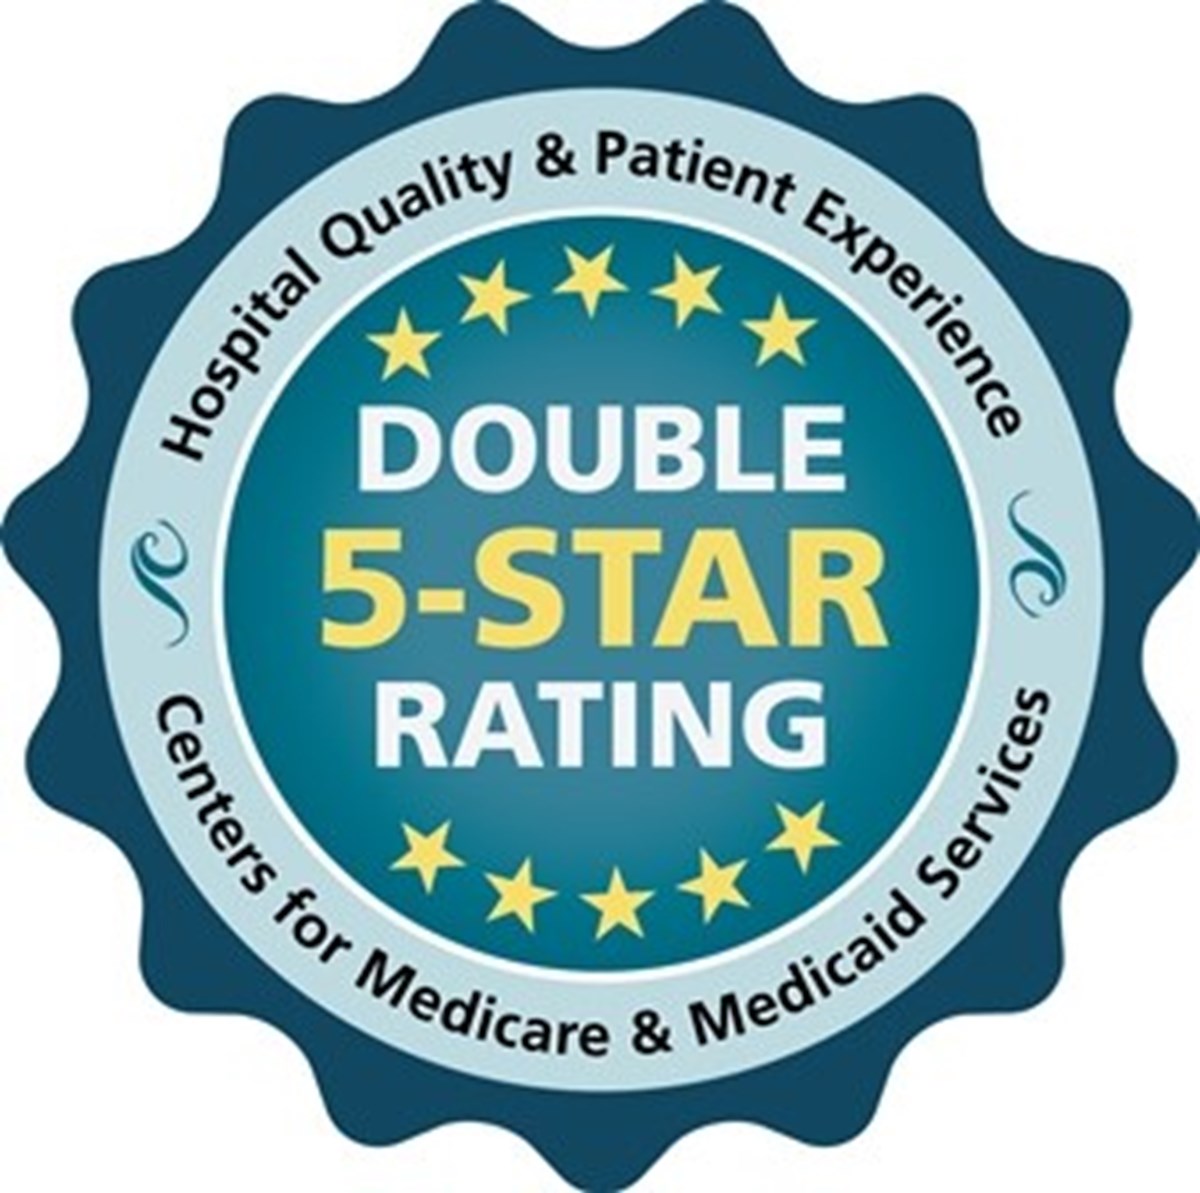 SCH leads RI with two 5-Star ratings from CMS